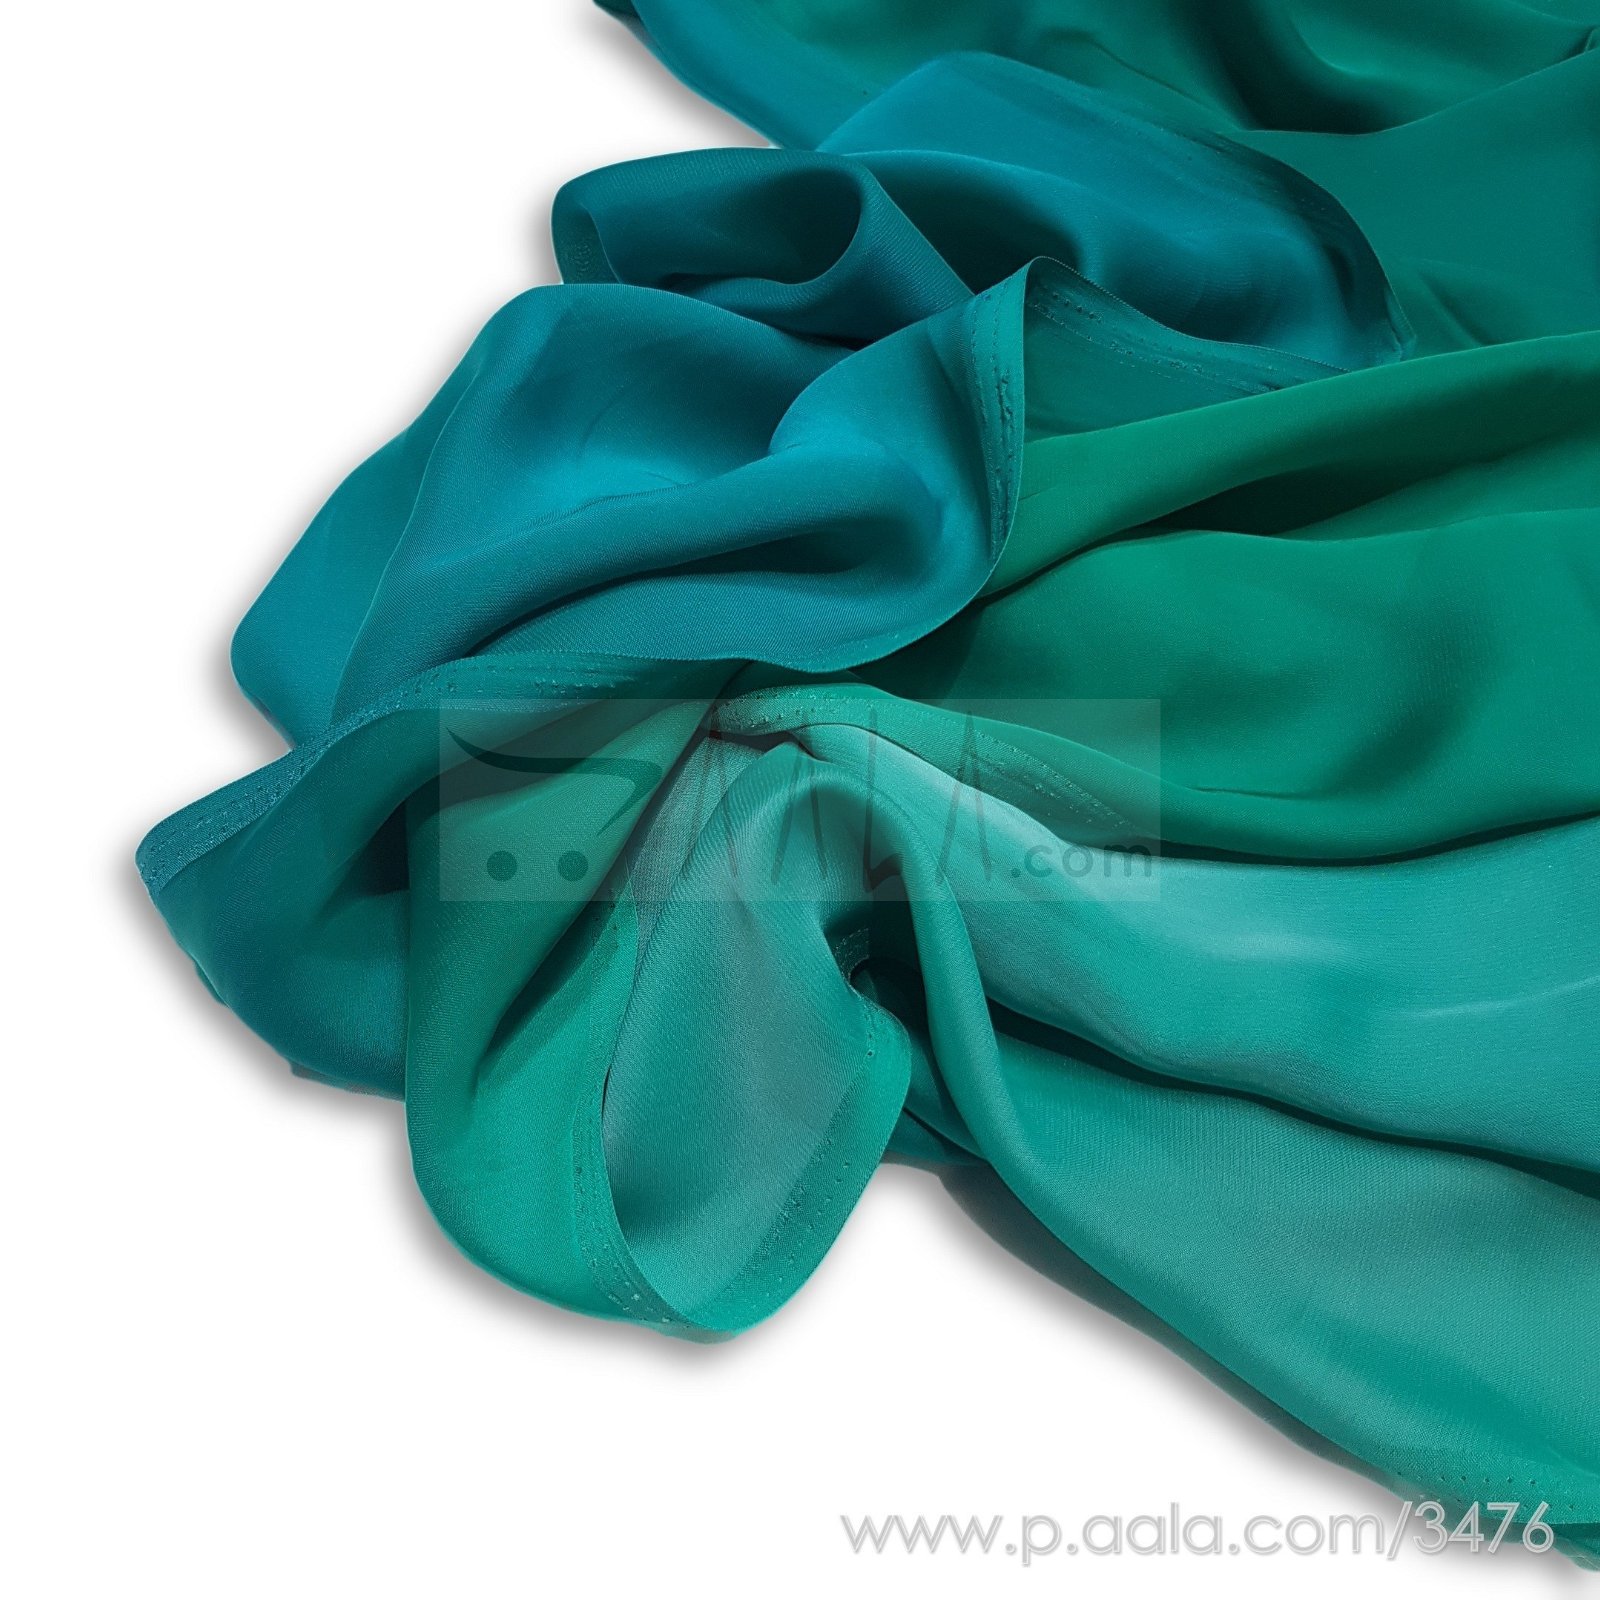 Blended Flat Chiffon Poly-ester 44 Inches Dyed Per Metre #3476